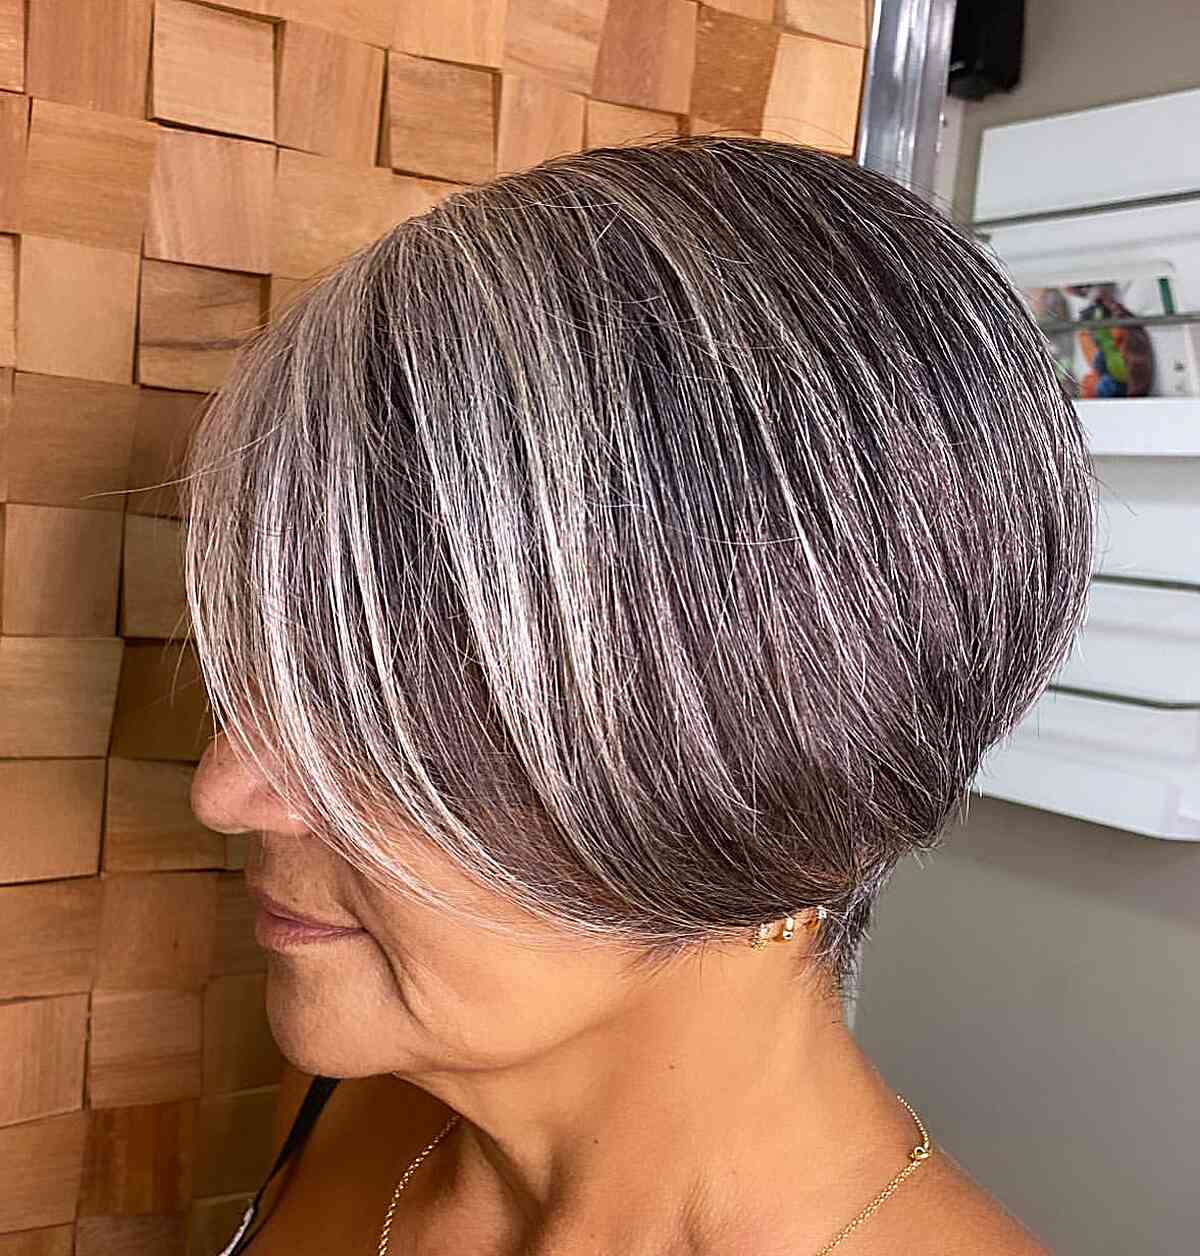 24 Flattering Hair Colors for Women Over 50 to Look Younger